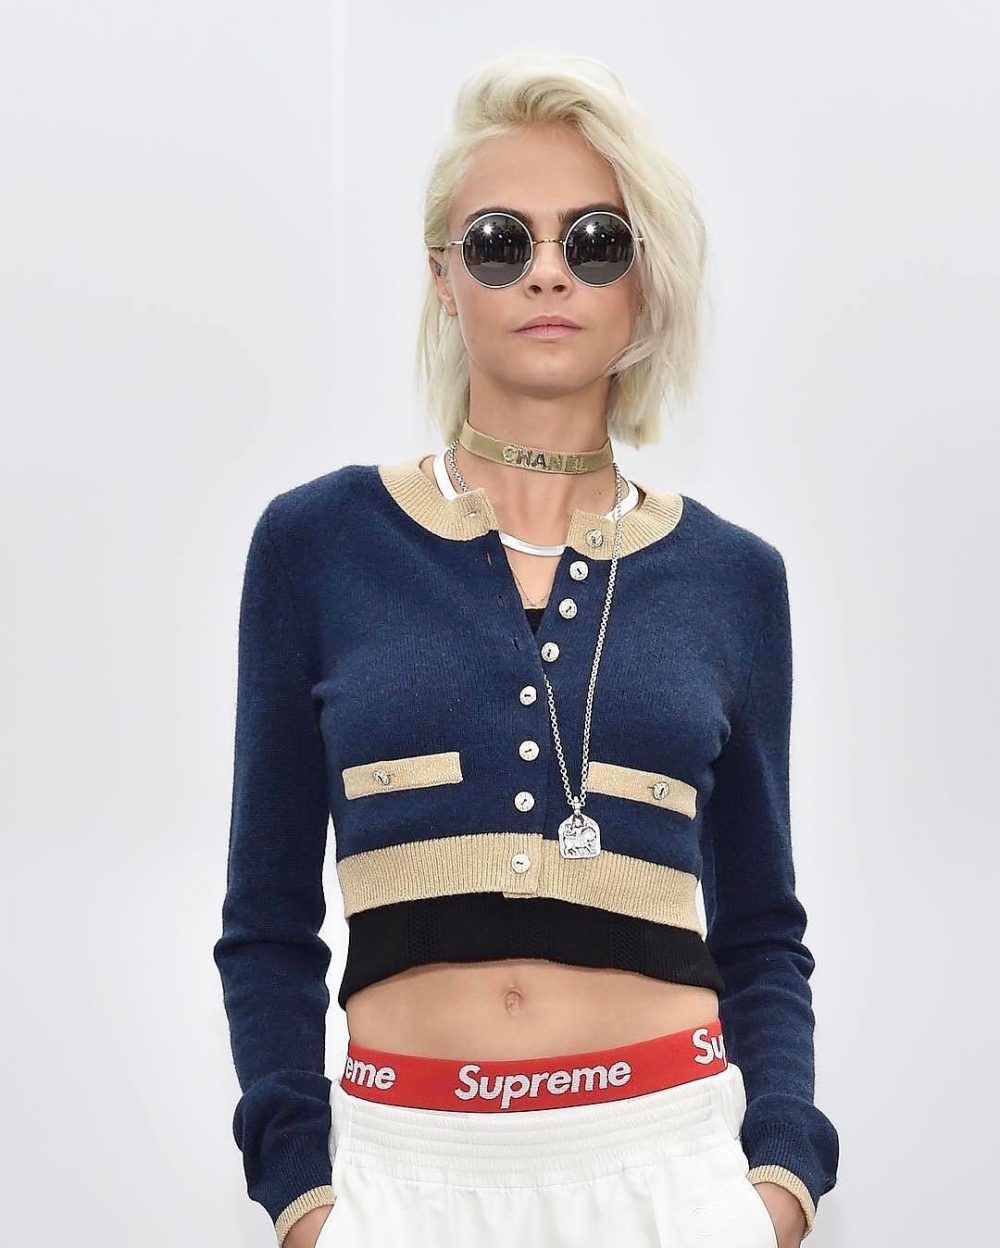 SPOTTED: Cara Delevingne in Men’s Supreme Boxers and Chanel